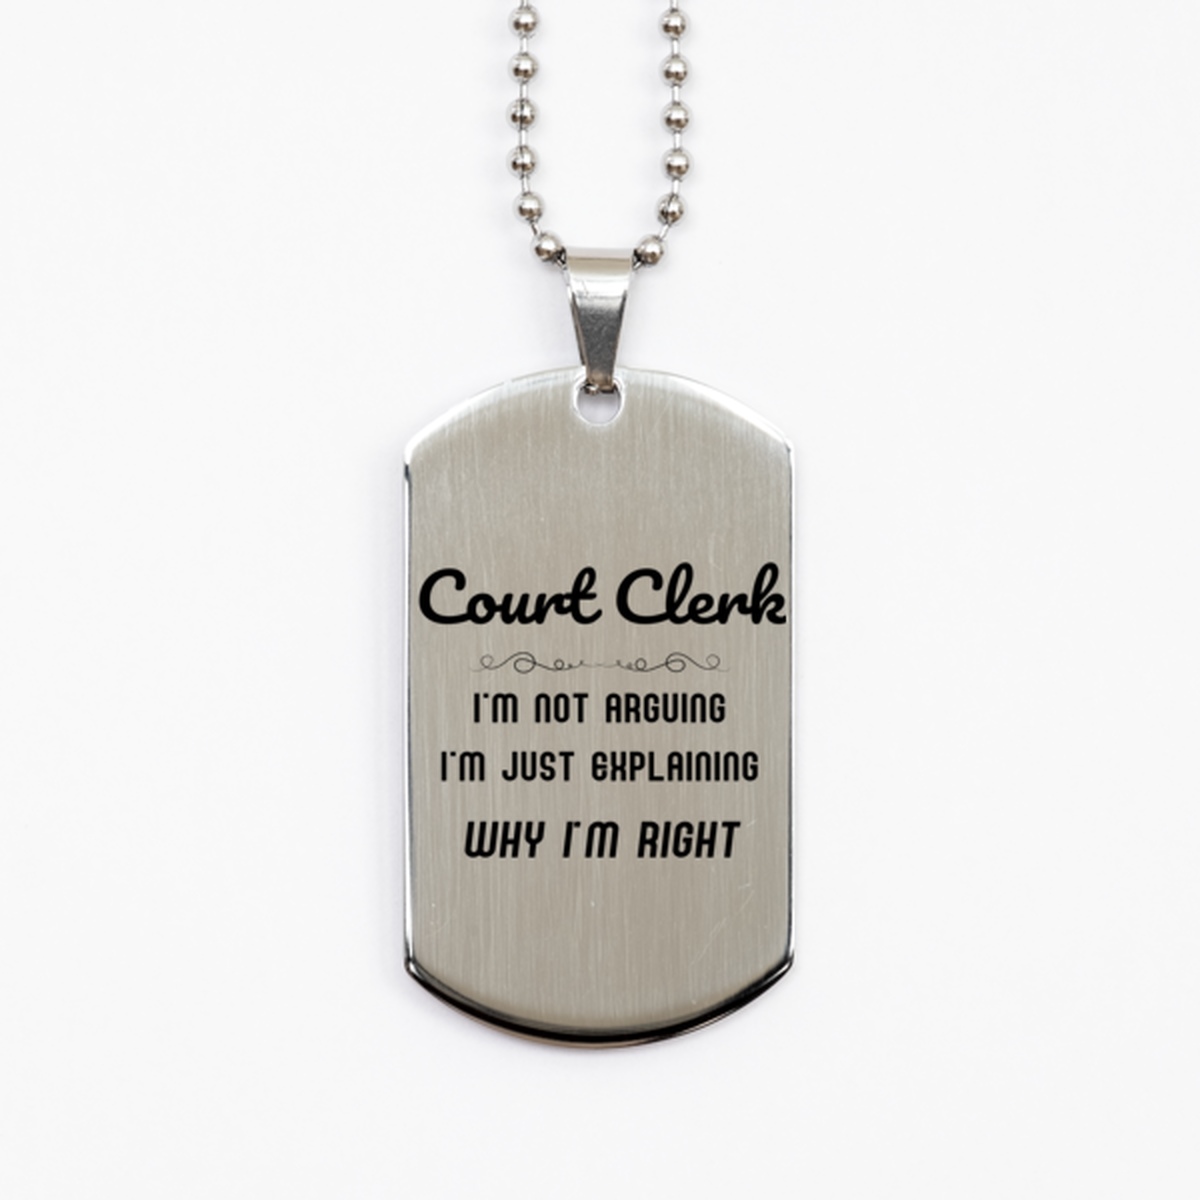 Court Clerk I'm not Arguing. I'm Just Explaining Why I'm RIGHT Silver Dog Tag, Funny Saying Quote Court Clerk Gifts For Court Clerk Graduation Birthday Christmas Gifts for Men Women Coworker